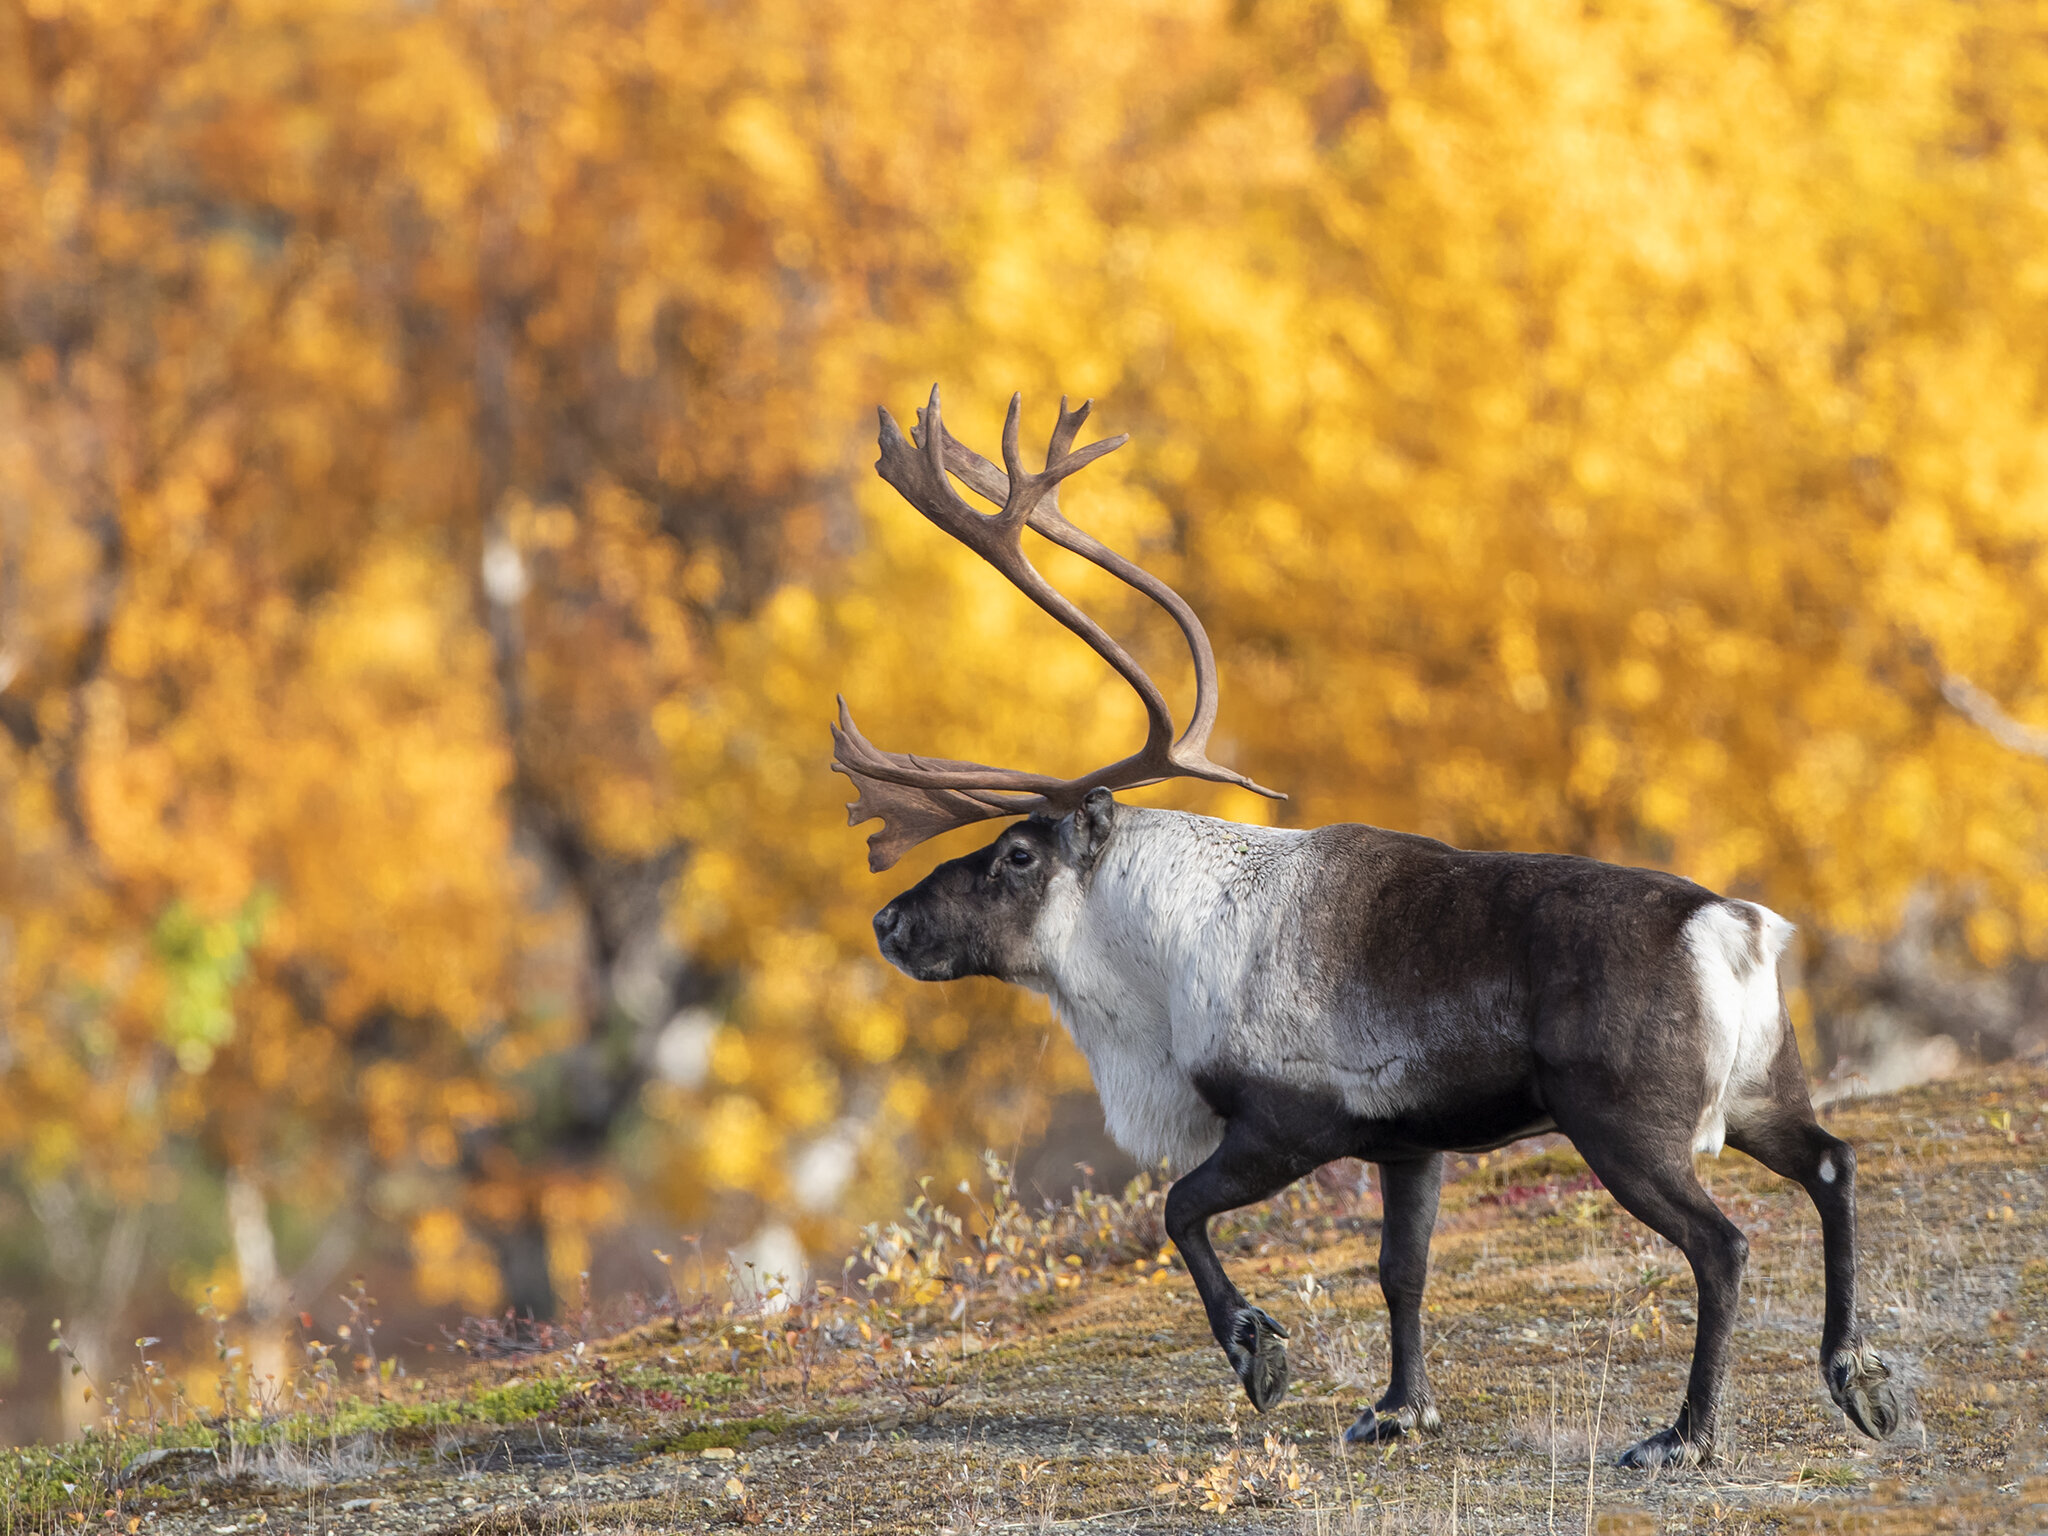  Norway has the latest wild reindeer populations in Europe. We therefore have a great responsibility to take care of the species and its habitats. 